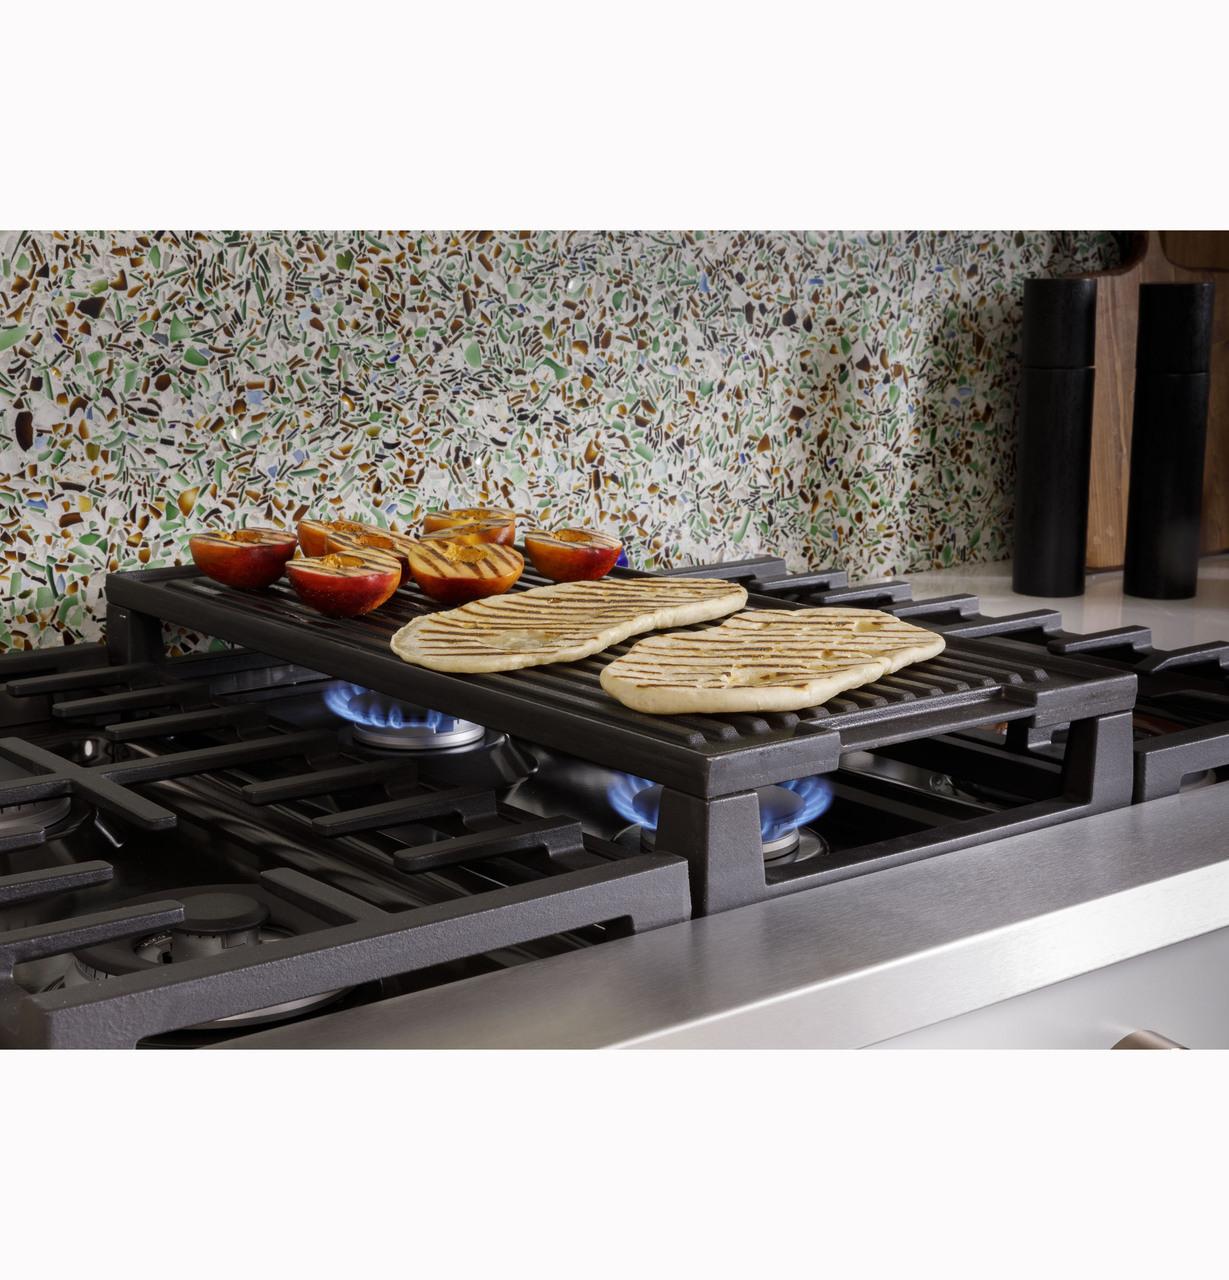 Cafe Caf(eback)™ 36" Commercial-Style Gas Rangetop with 6 Burners (Natural Gas)